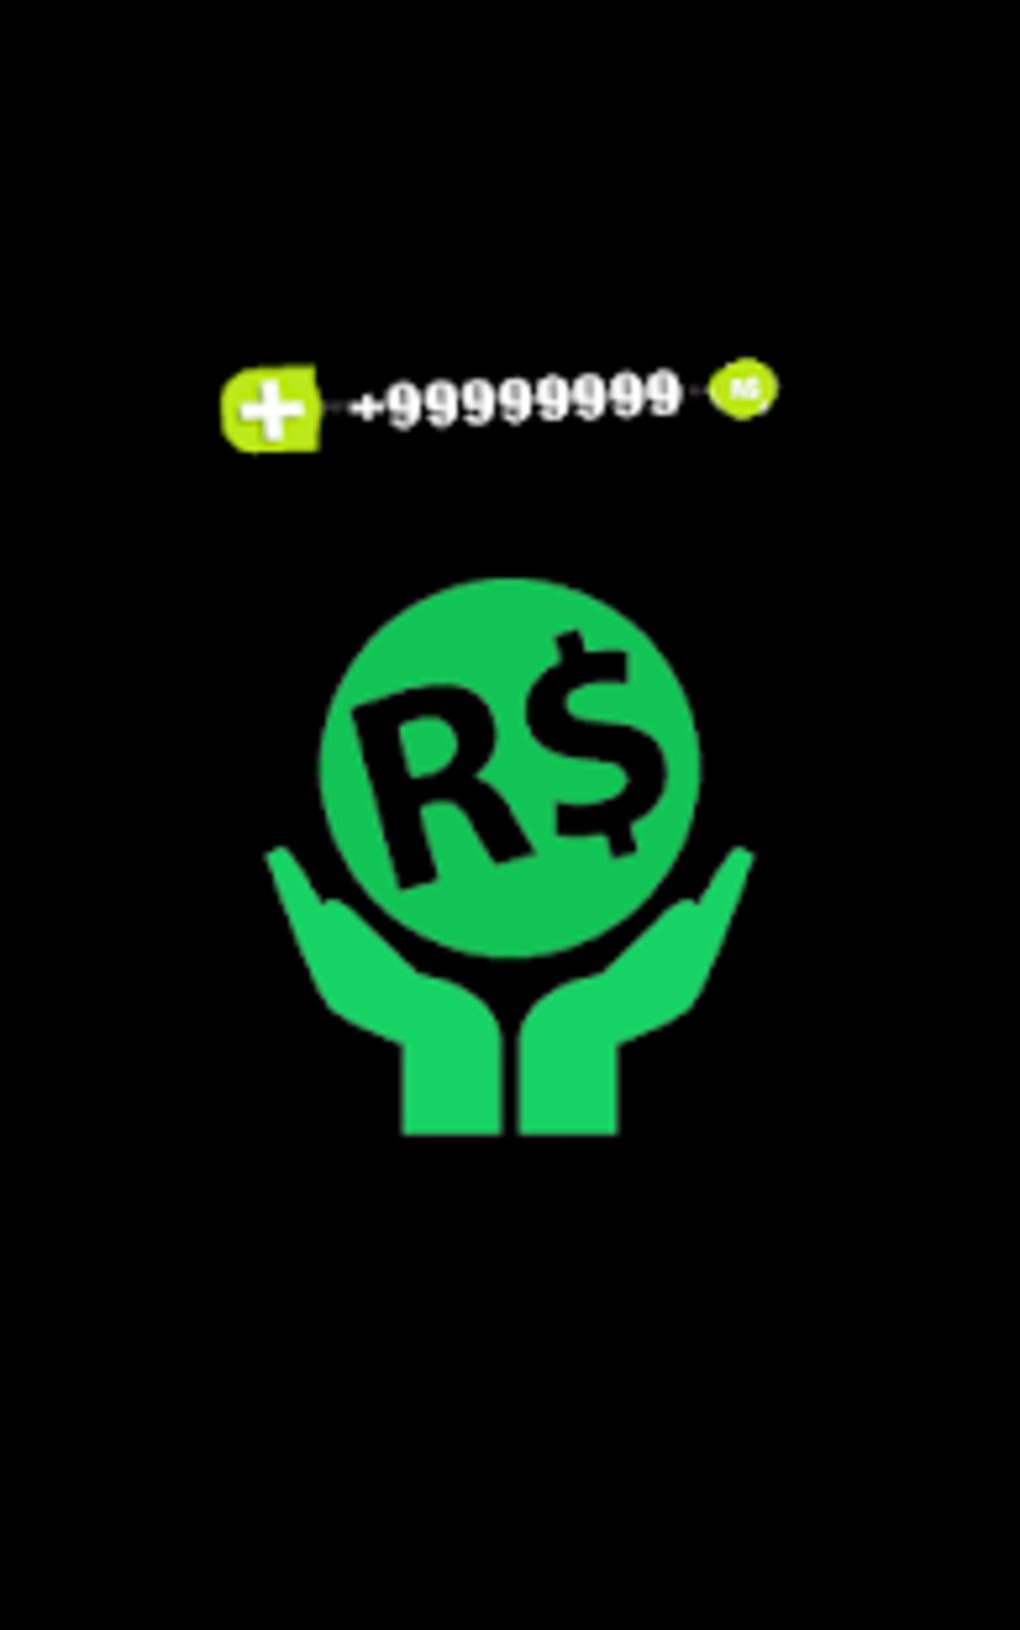 Free Robux Lucky Patcher - fnaf skin pack for roblox free robux hack generator club yts